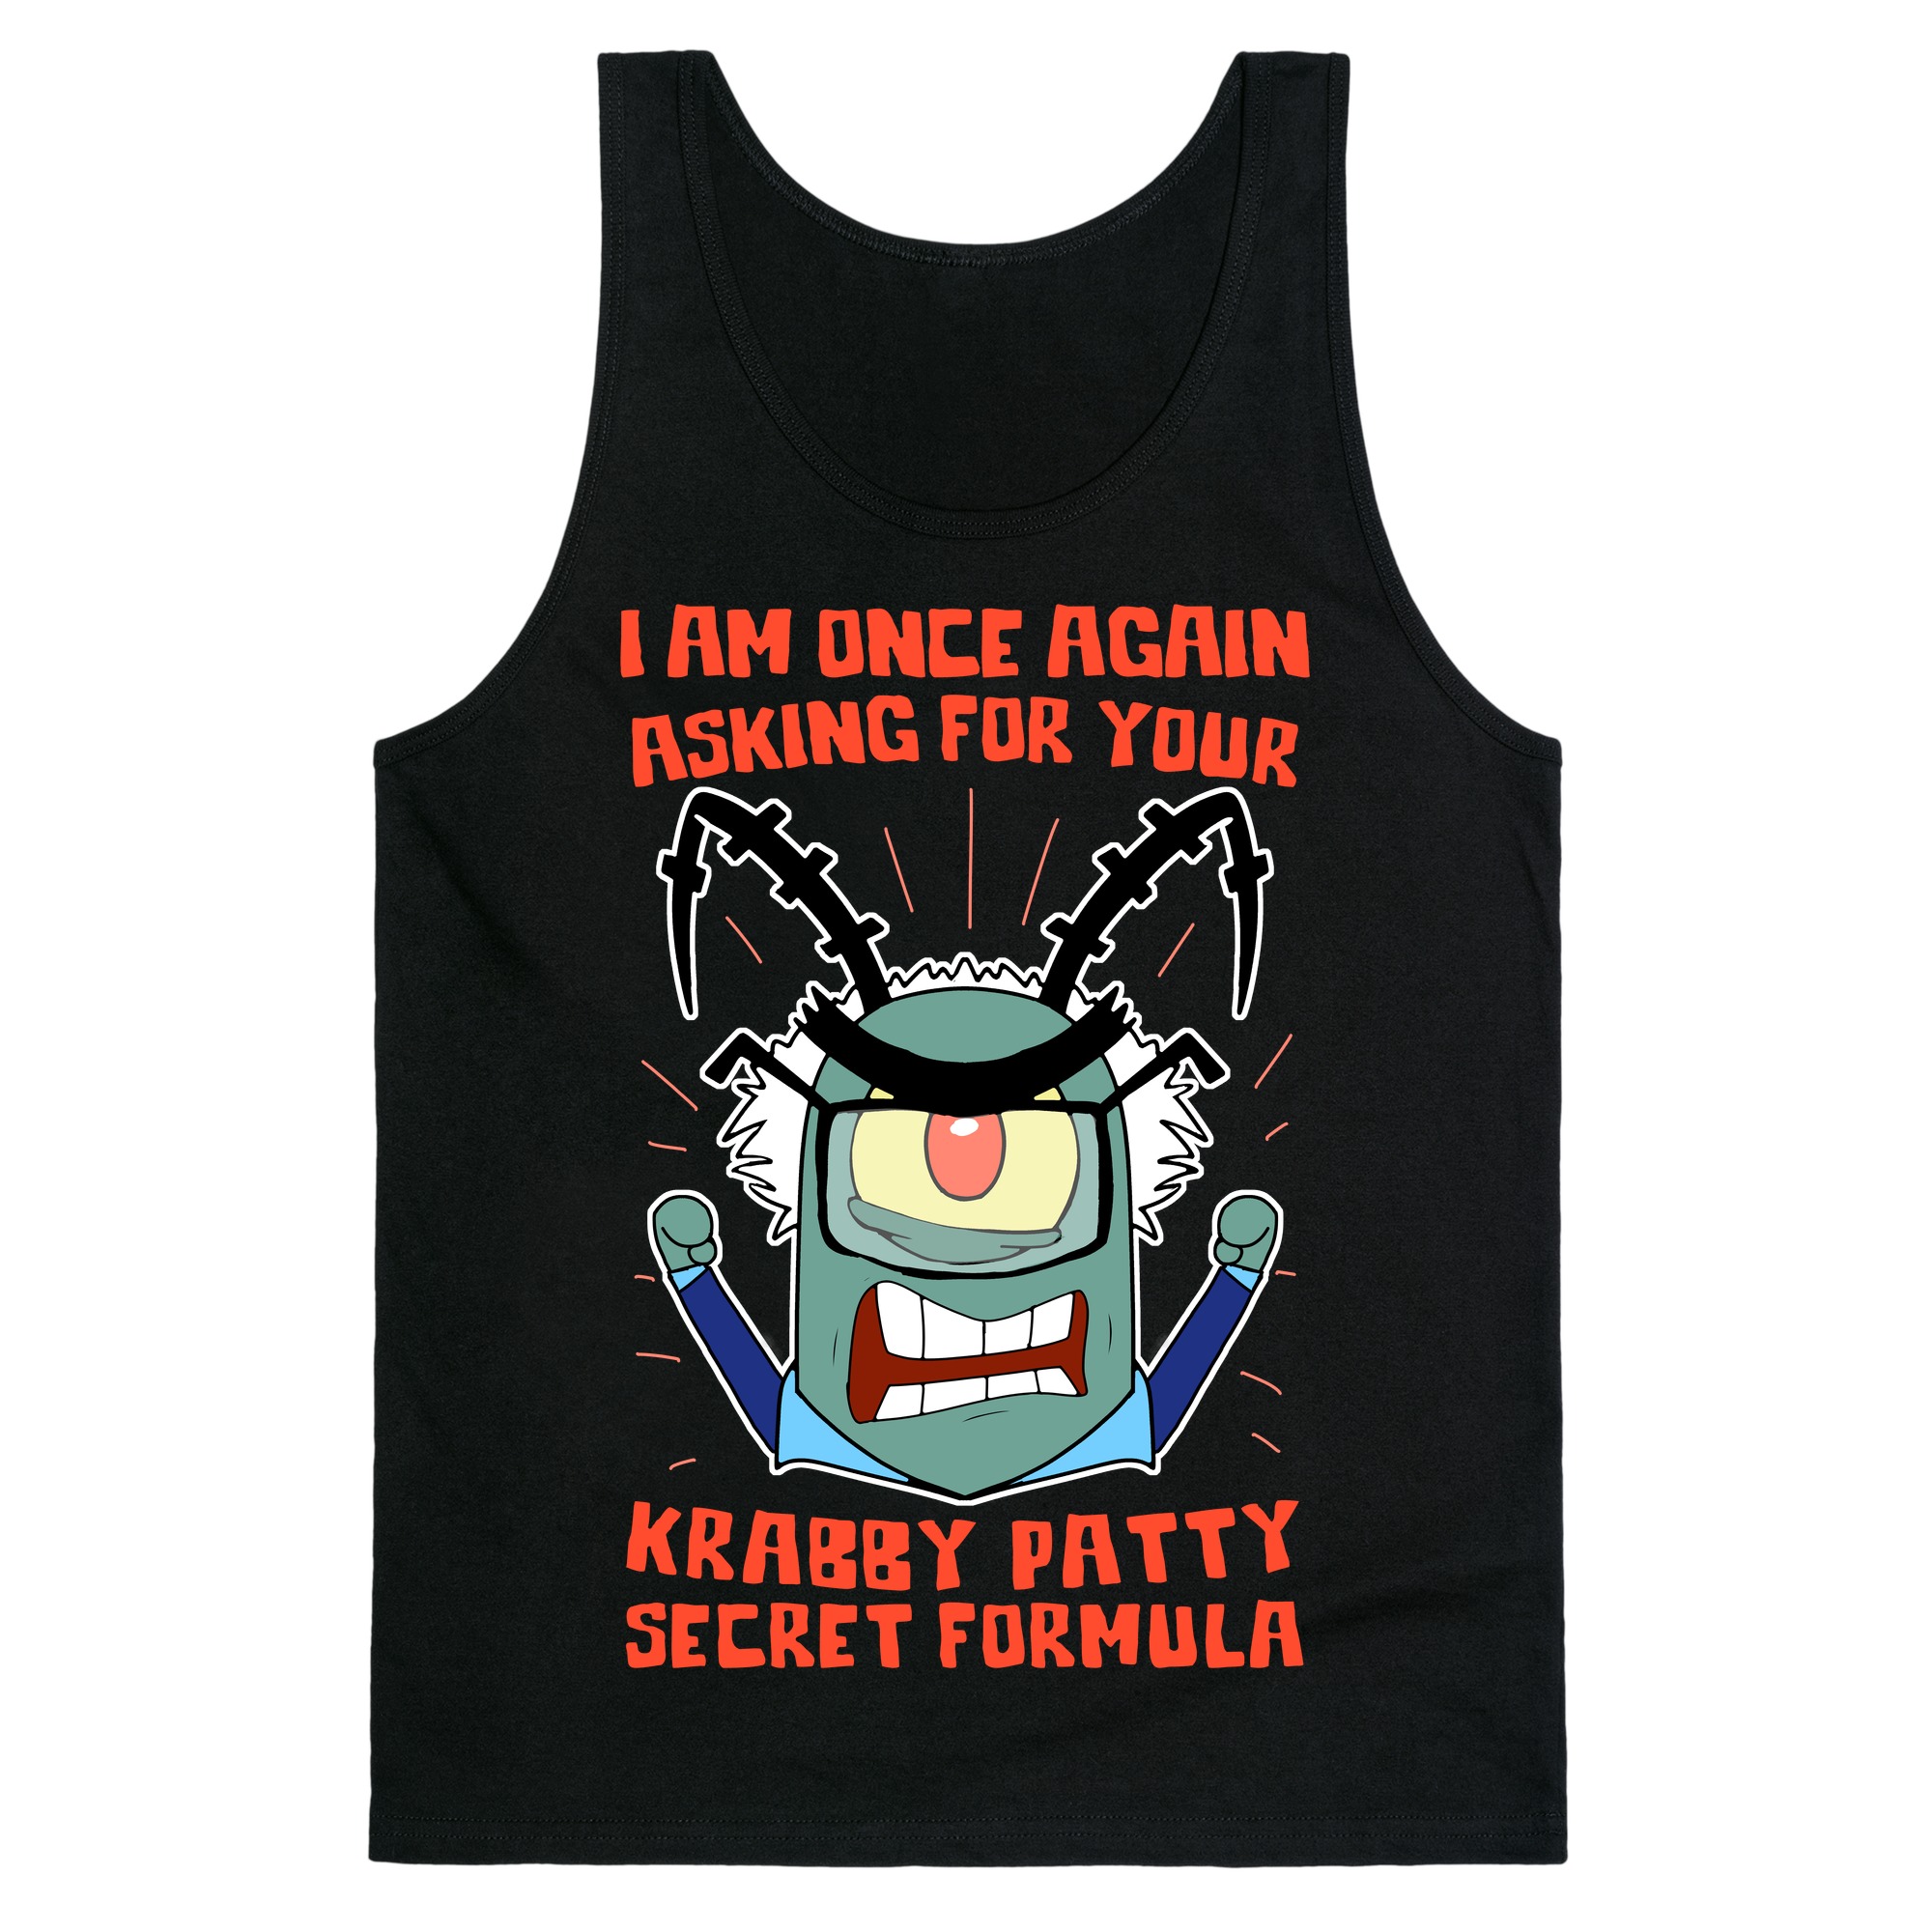 I Am Once Again Asking For Your Krabby Patty Secret Formula Tank Tops Lookhuman